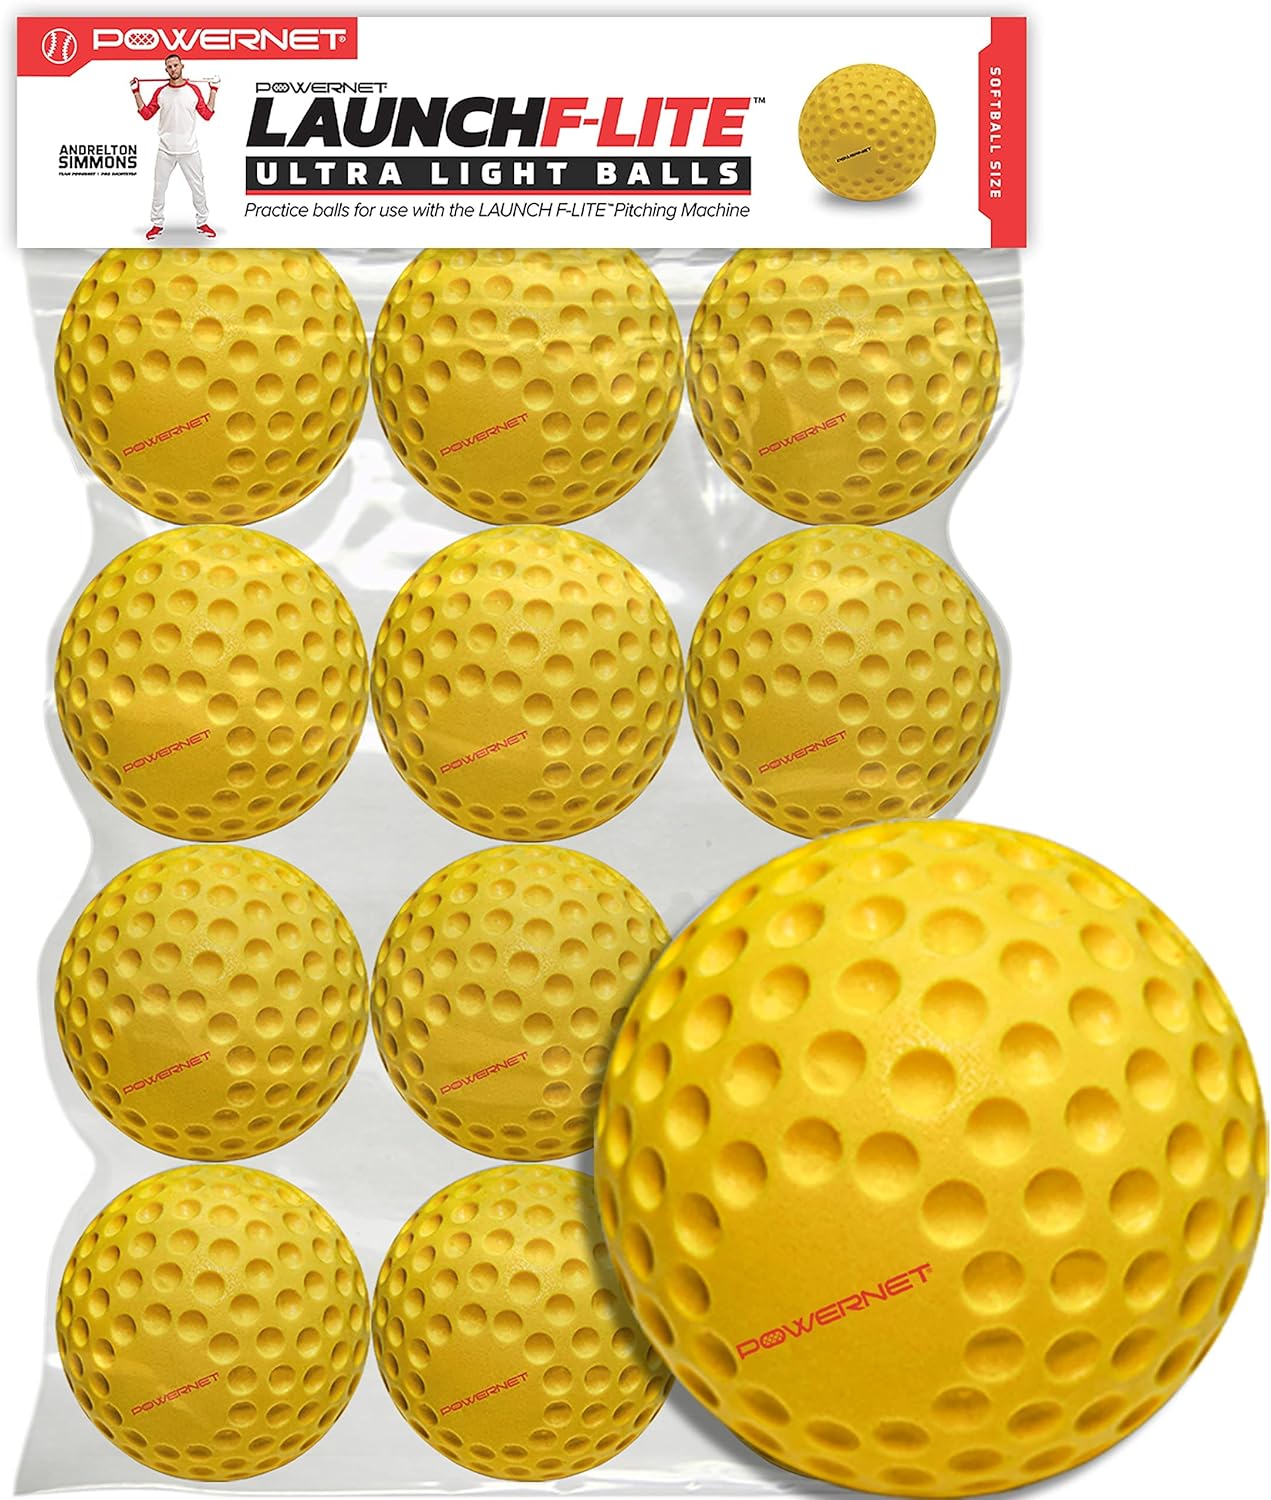 PowerNet 12-Pack Dimpled Practice Ultra-Light Softballs for the Launch F-Lite Pitching Machine